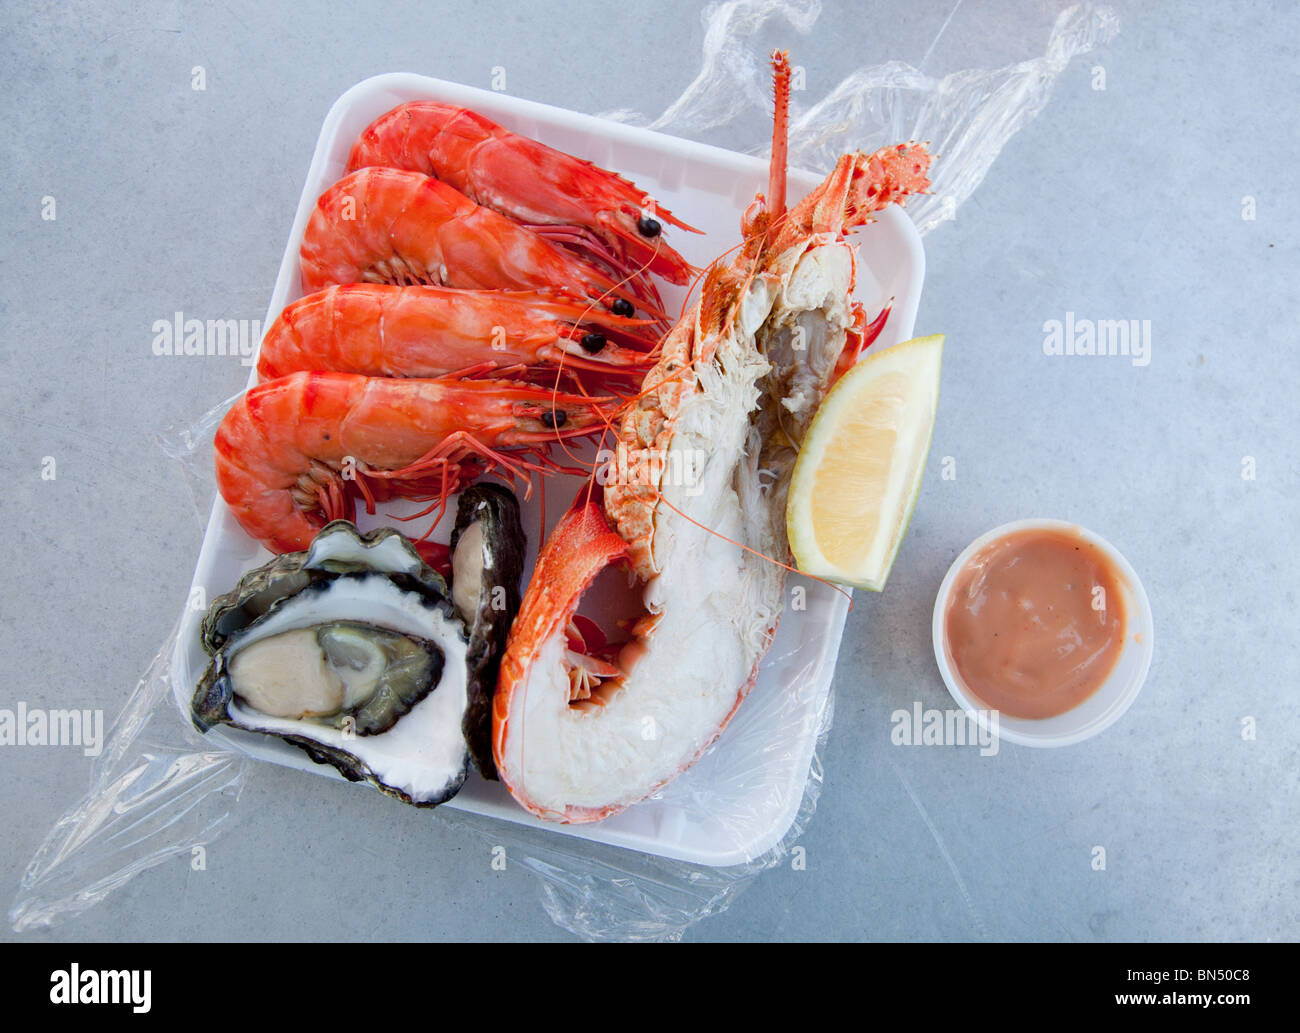 A meal containing Lobster, Shrimp, and Oysters at the Sydney Fish Market in Sydney, Australia Stock Photo